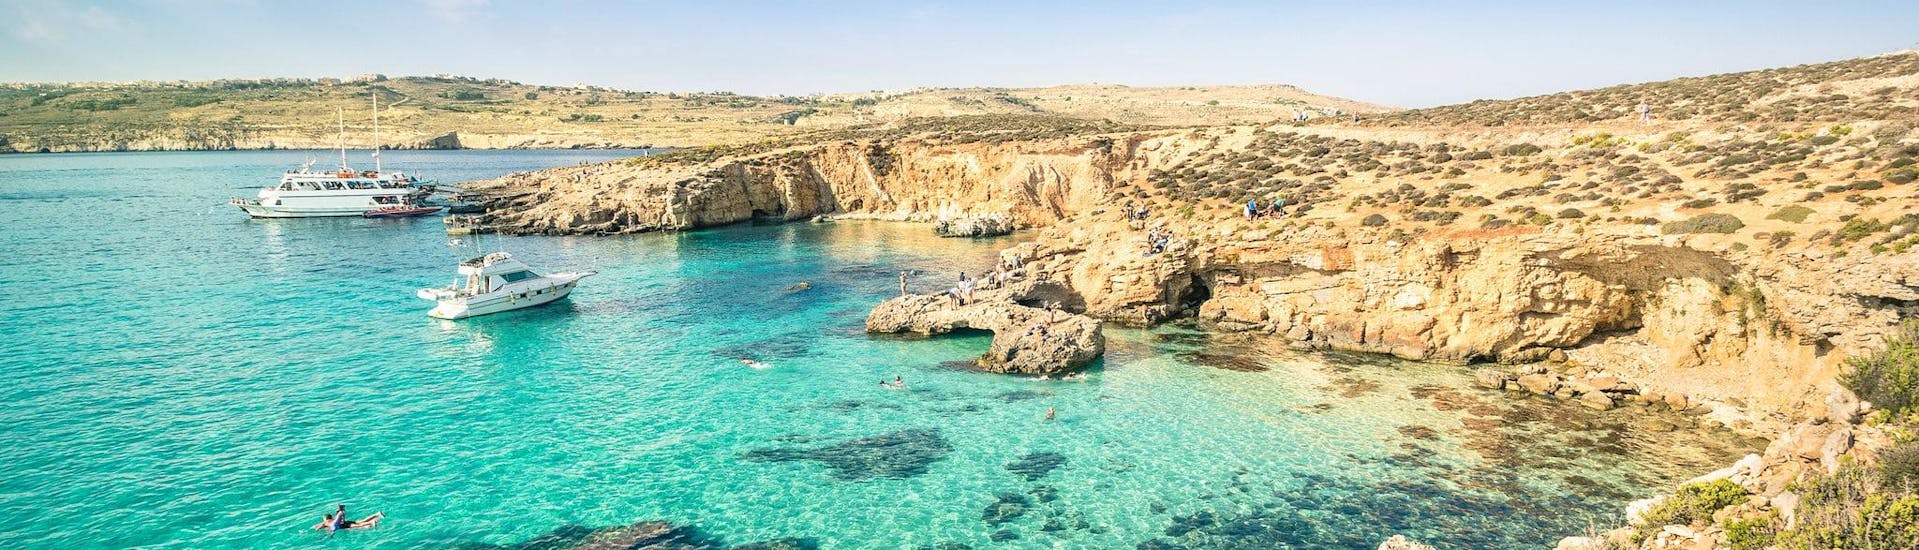 View of the famous Blue Lagoon, which is a popular destination for boat trips from Bugibba, Malta.